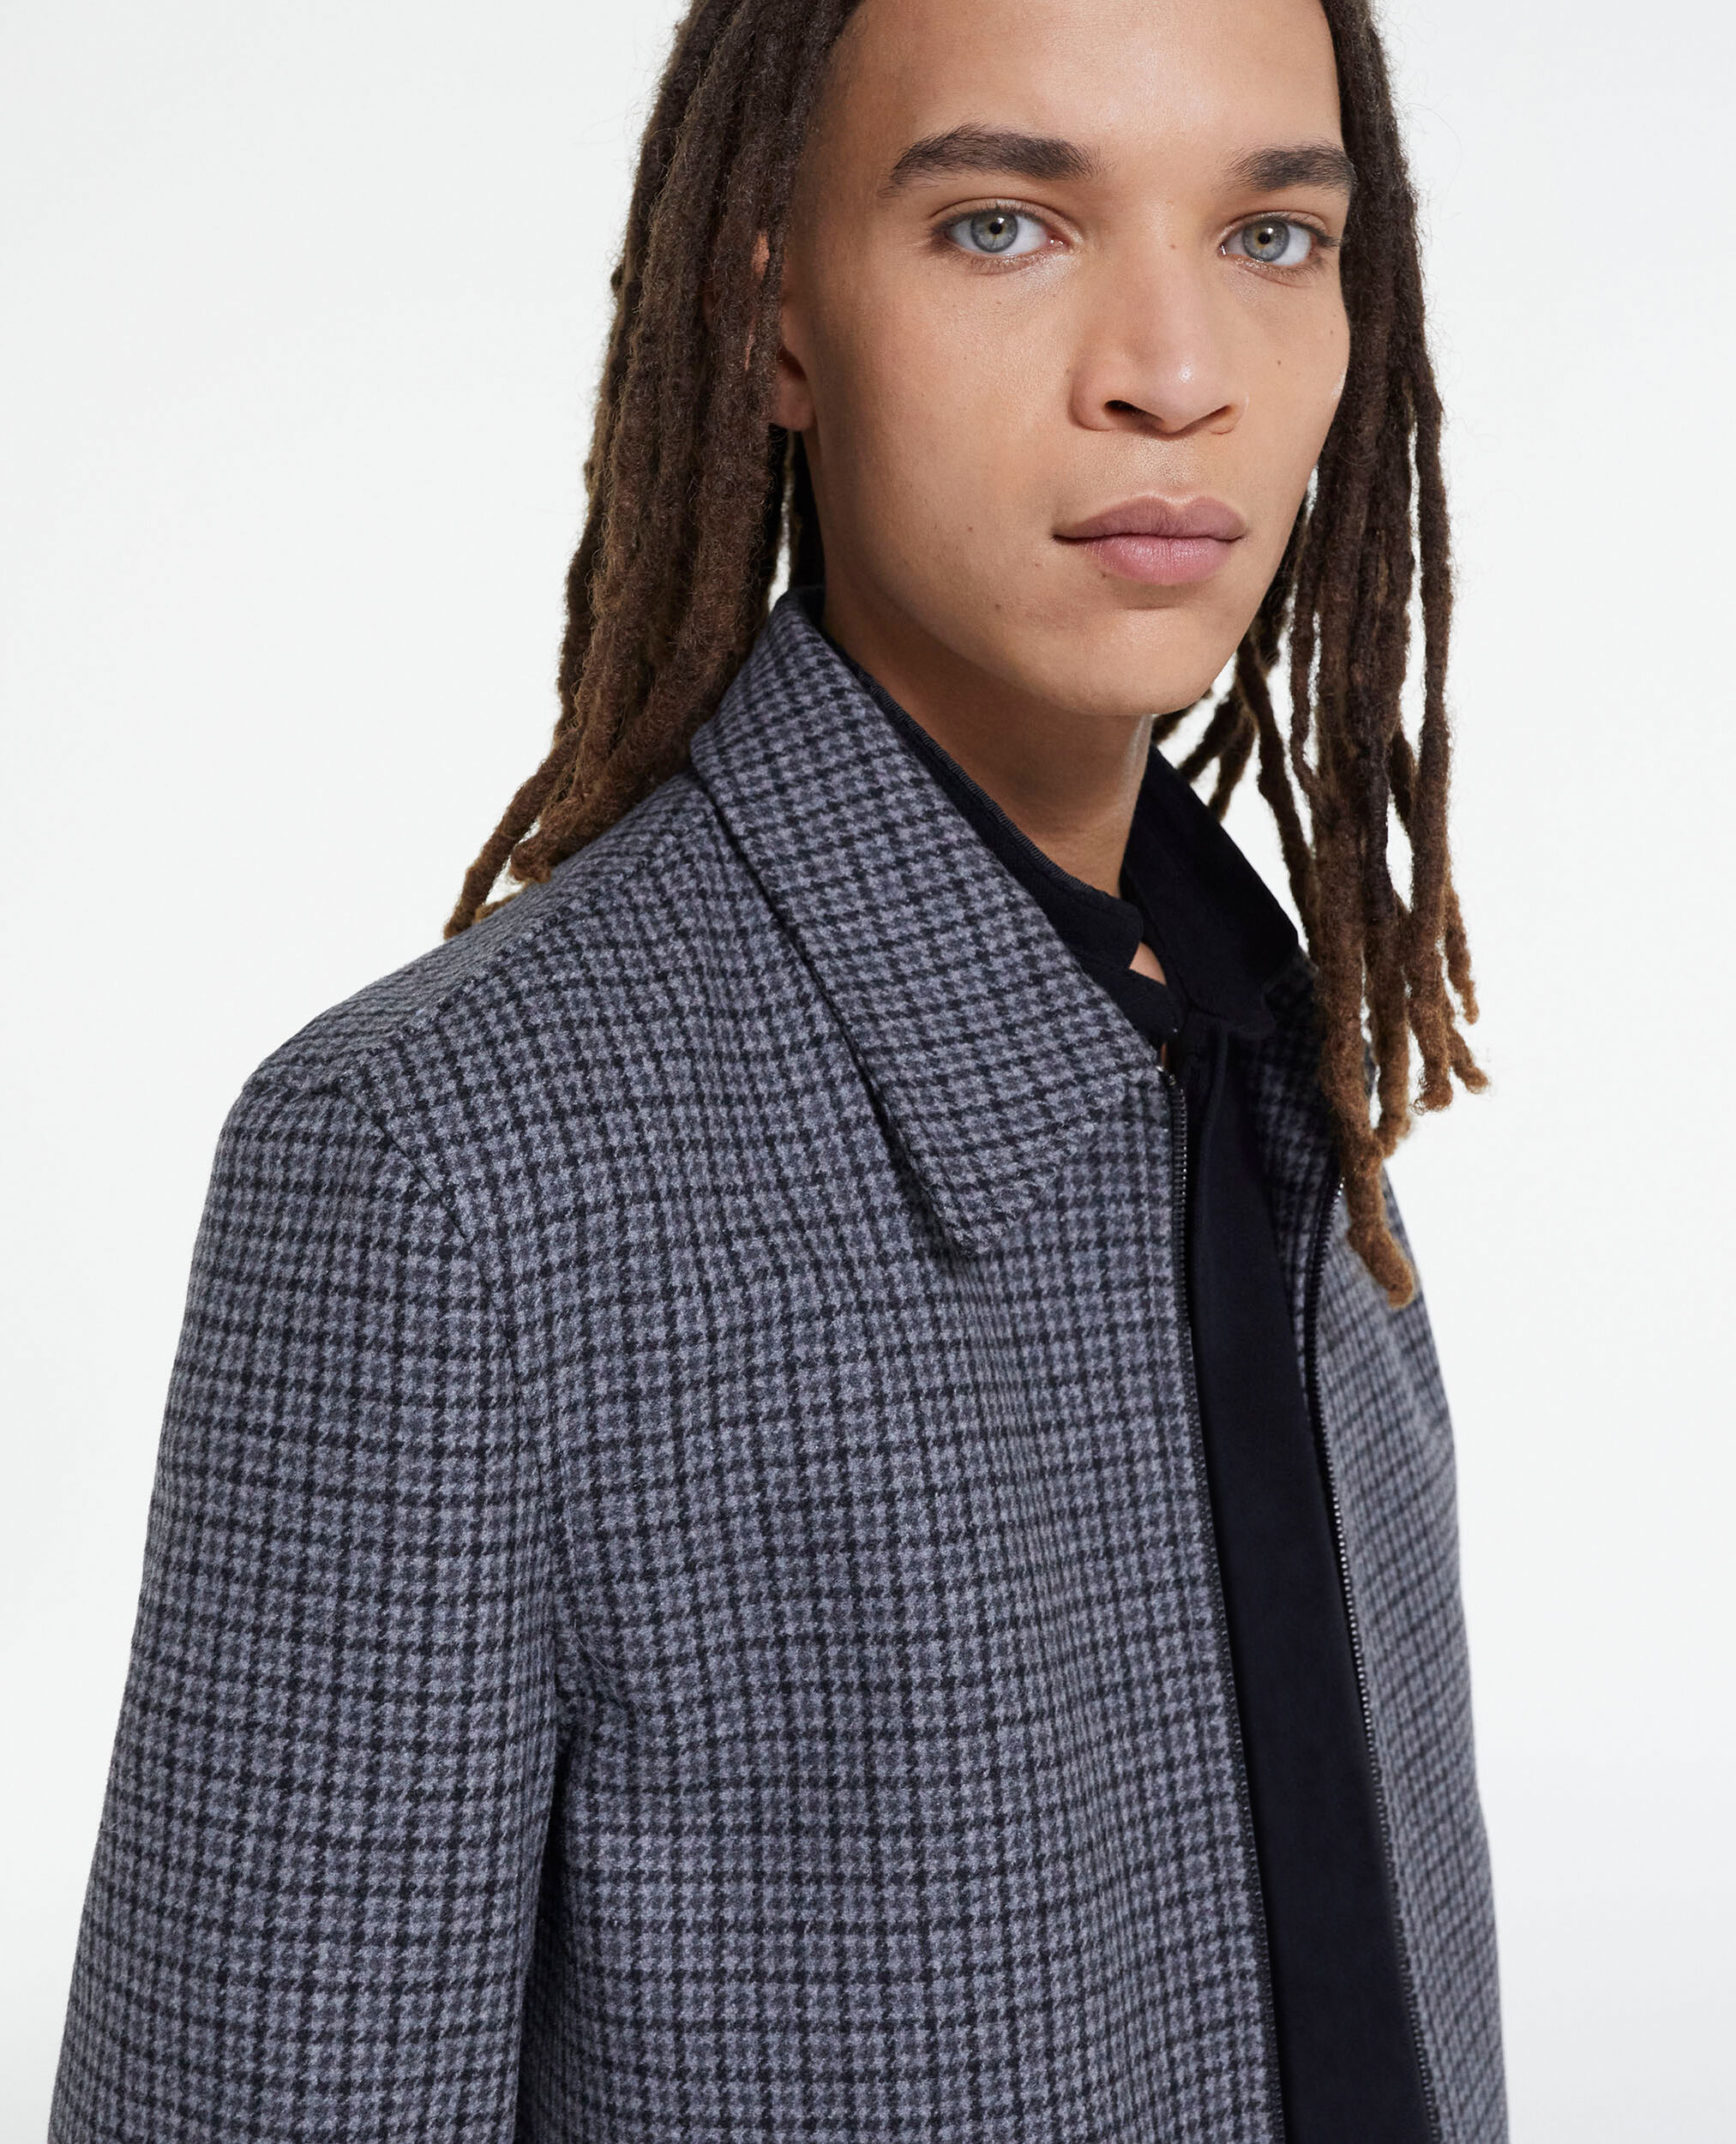 Check wool jacket with pockets, GREY BLACK, hi-res image number null